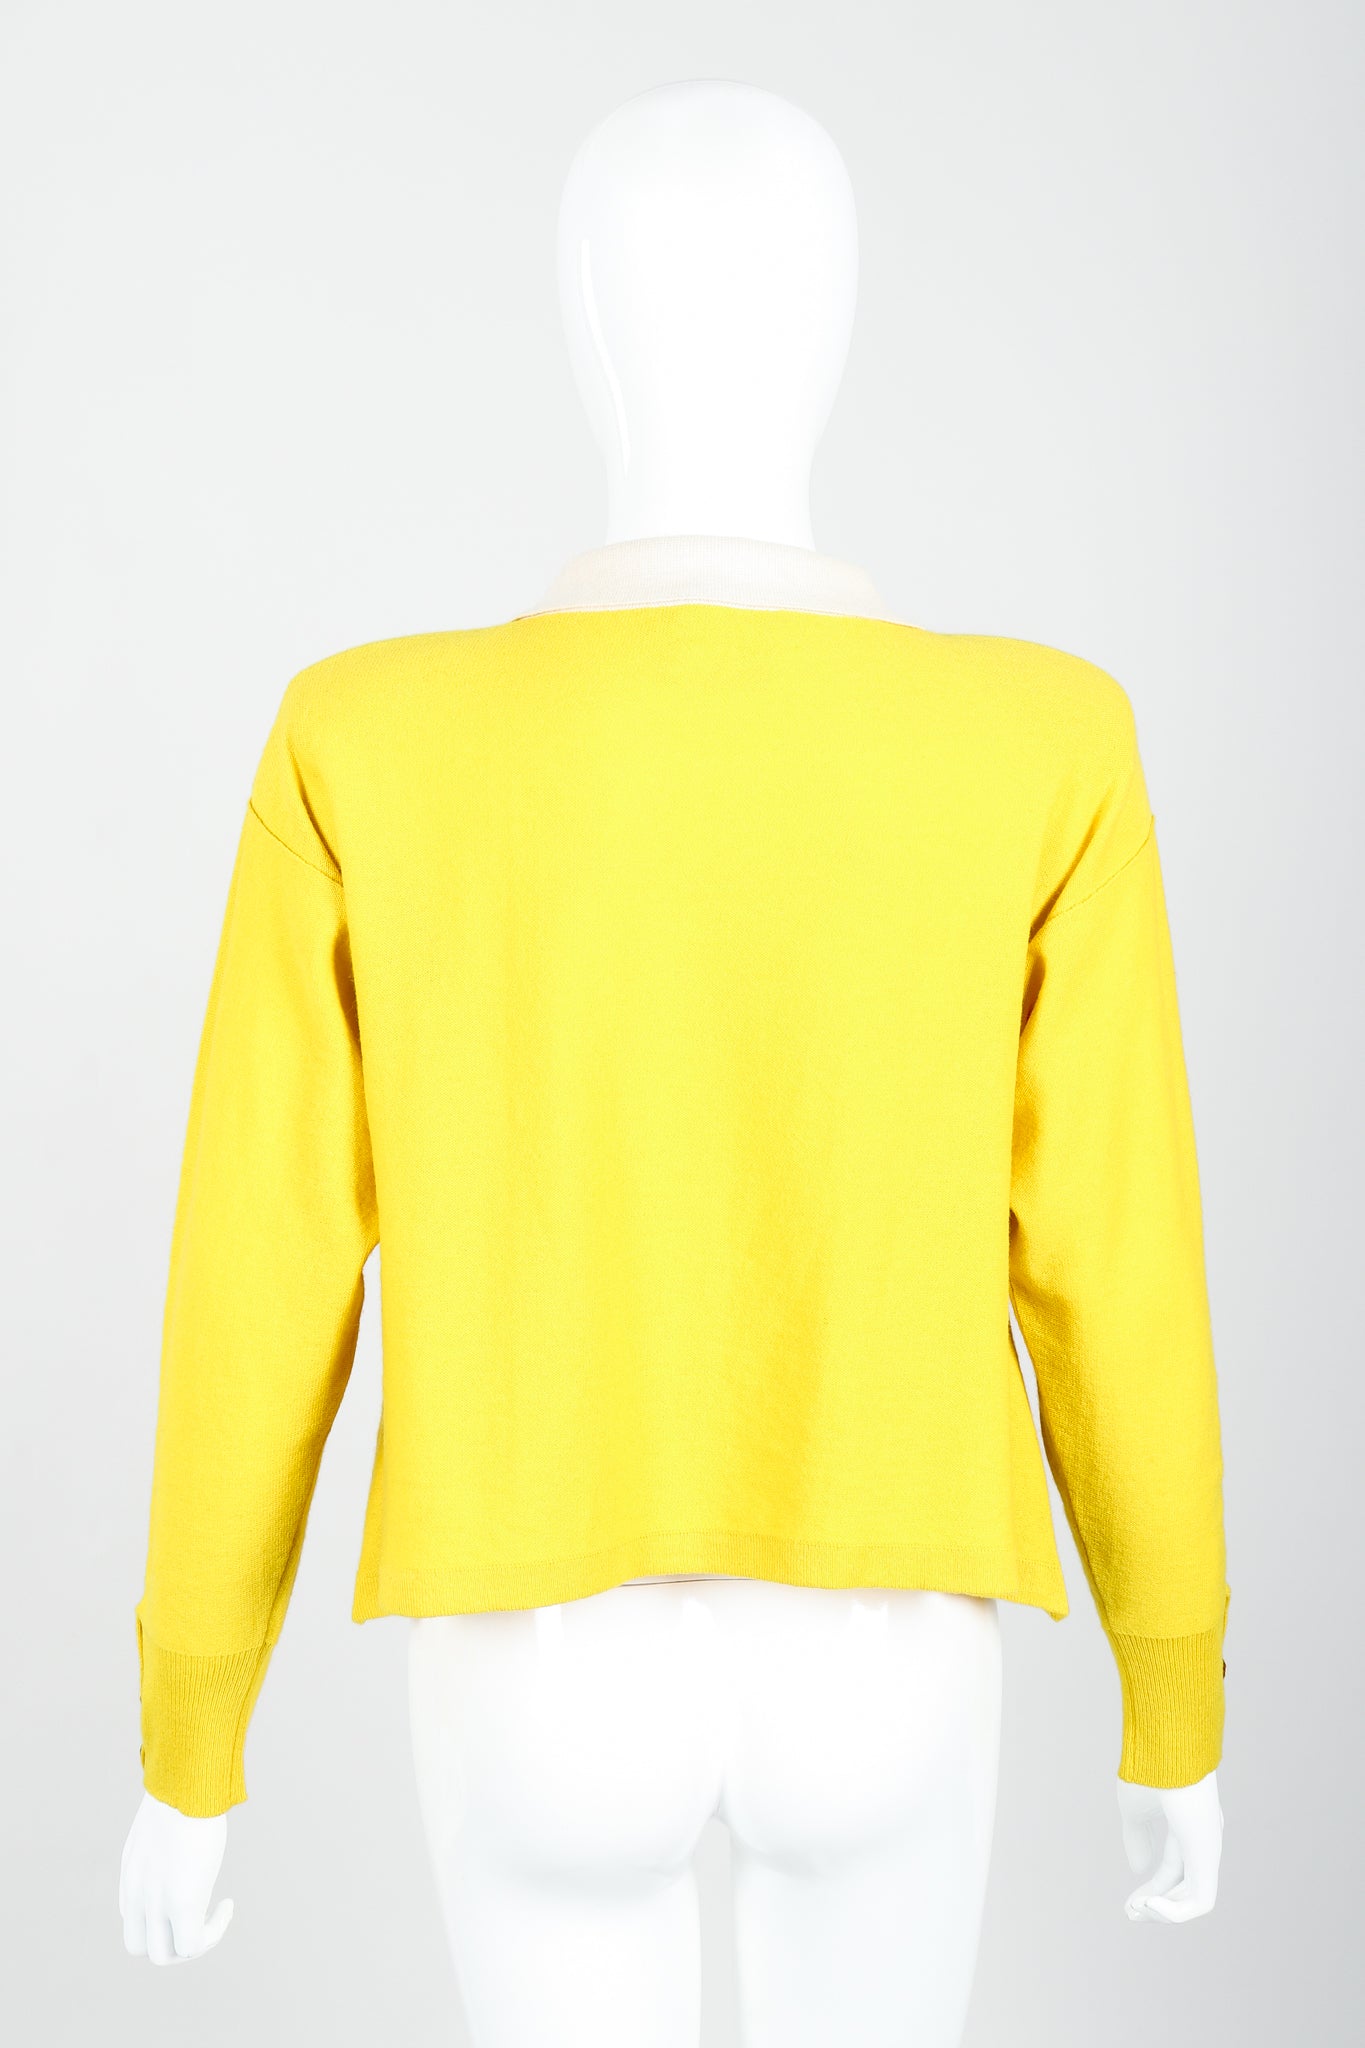 Vintage Sonia Rykiel Yellow Bow Collared Swing Sweater on Mannequin Back at Recess